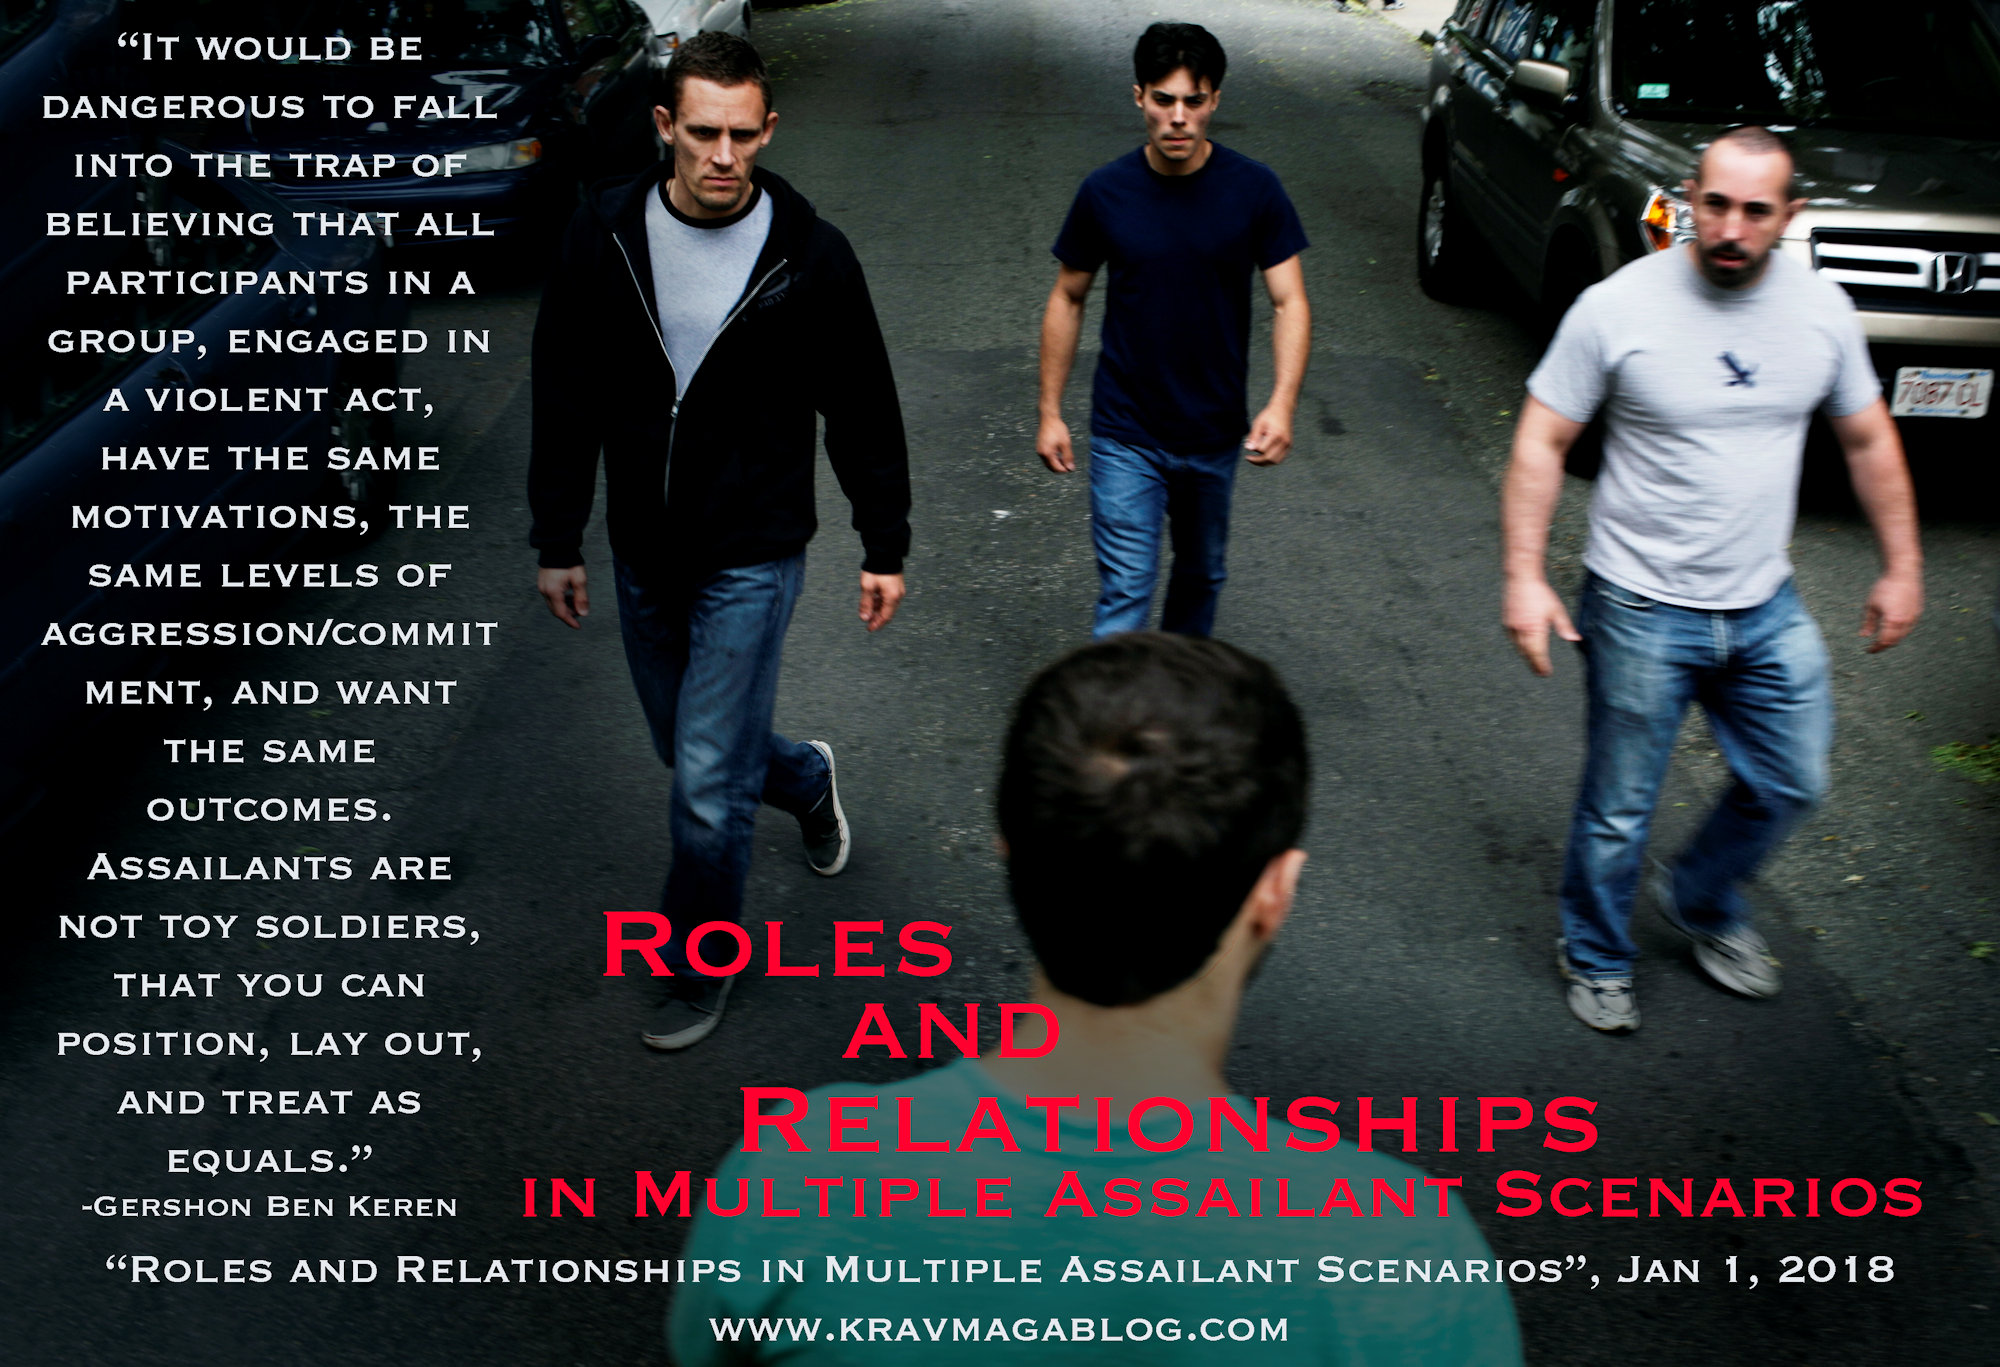 Blog About Roles and Relationships in Multiple Assailant Scenarios